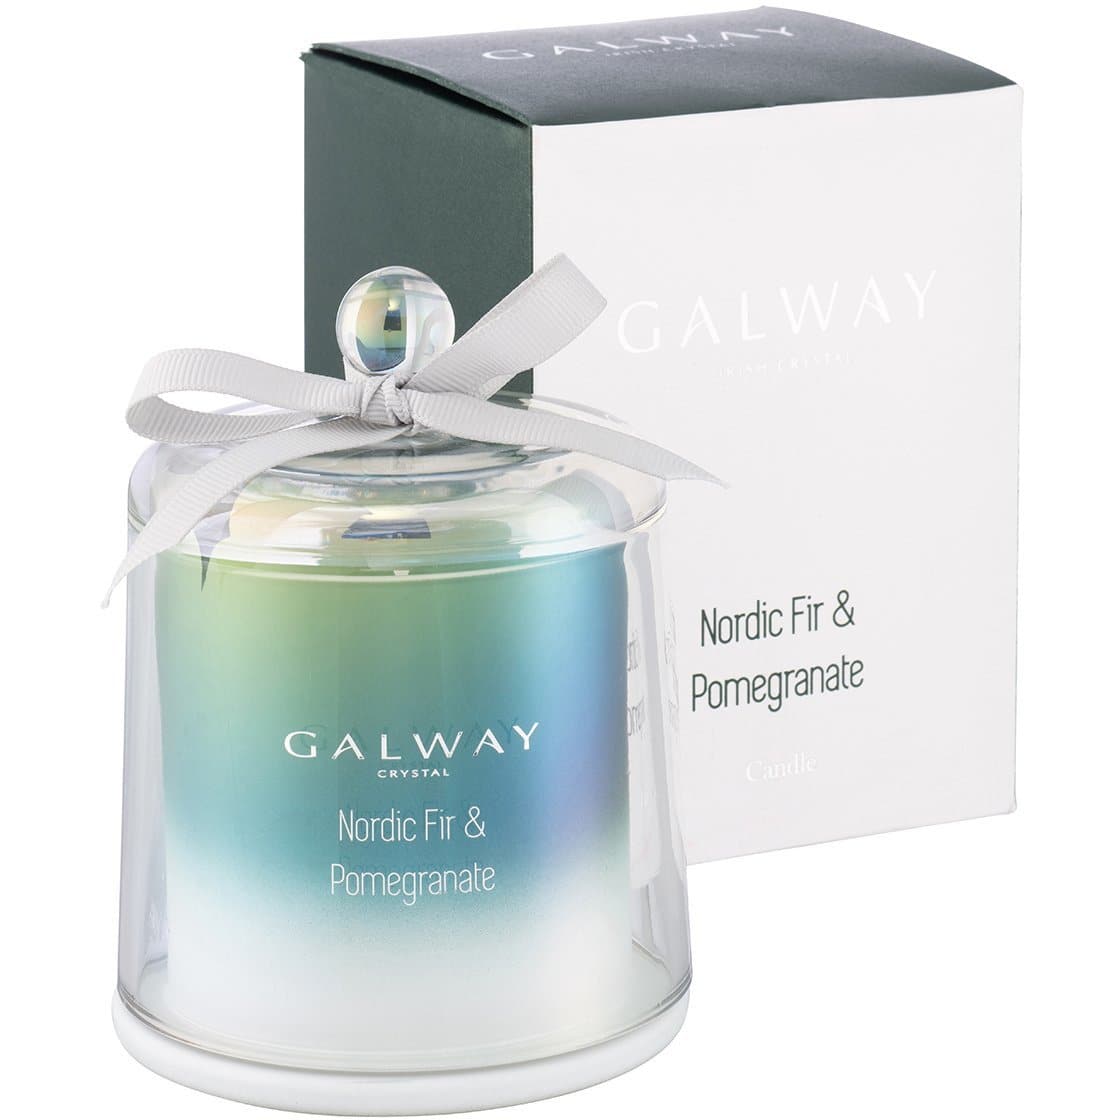 Nordic Fir & Pomegranate Bell Jar Candle - Galway Irish Crystal